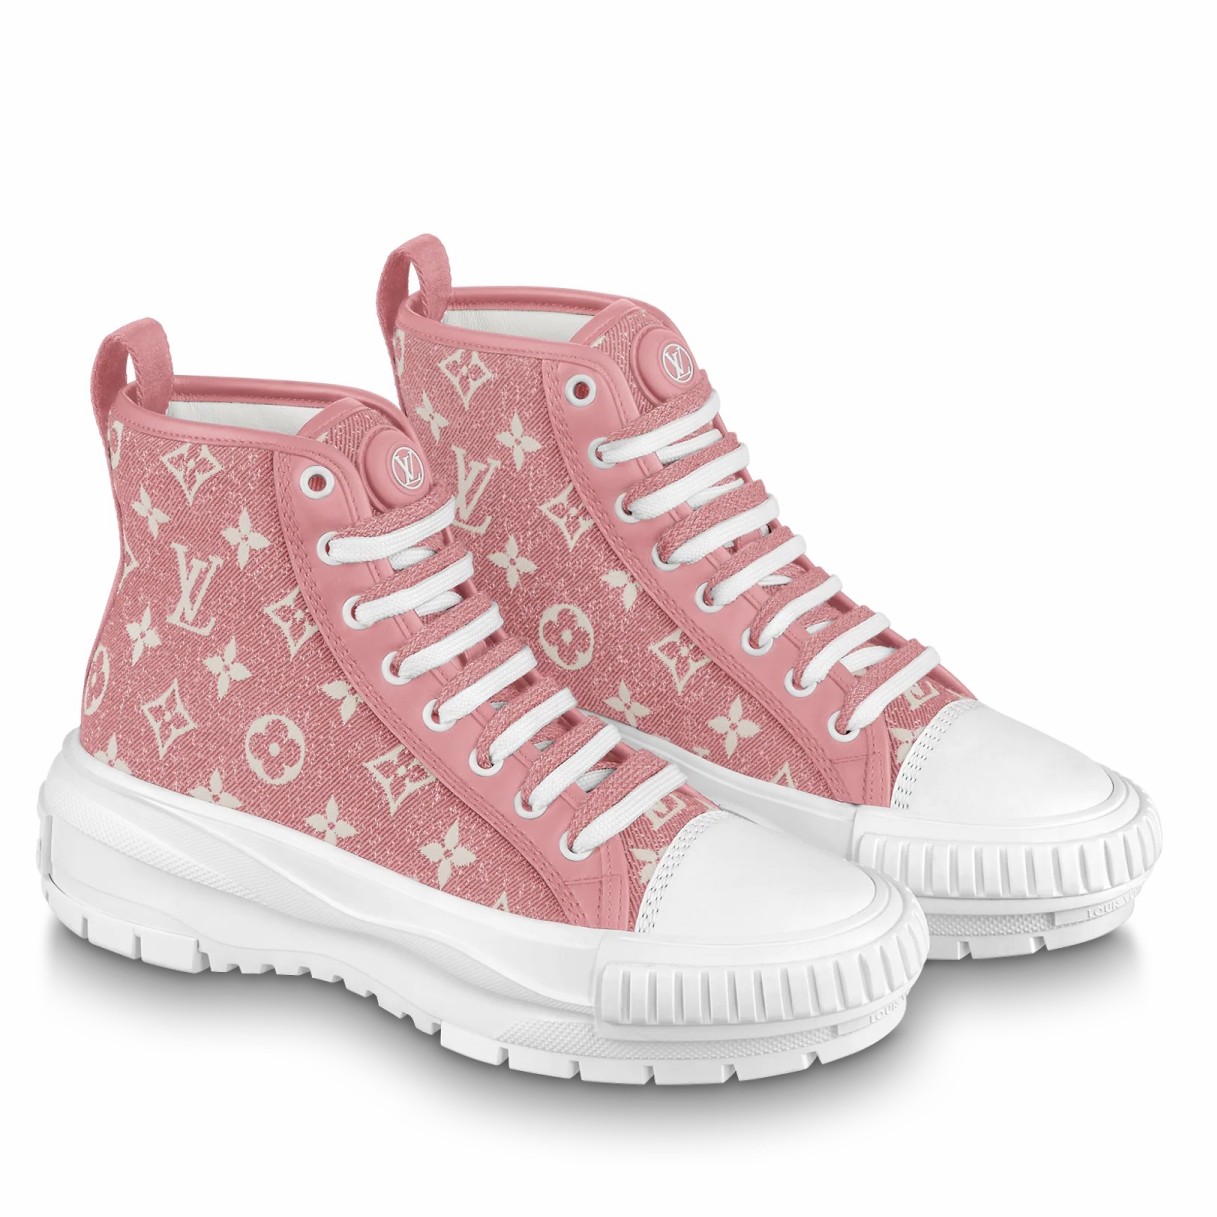 Louis Vuitton LV Monogram Chunky Sneakers - Pink Sneakers, Shoes